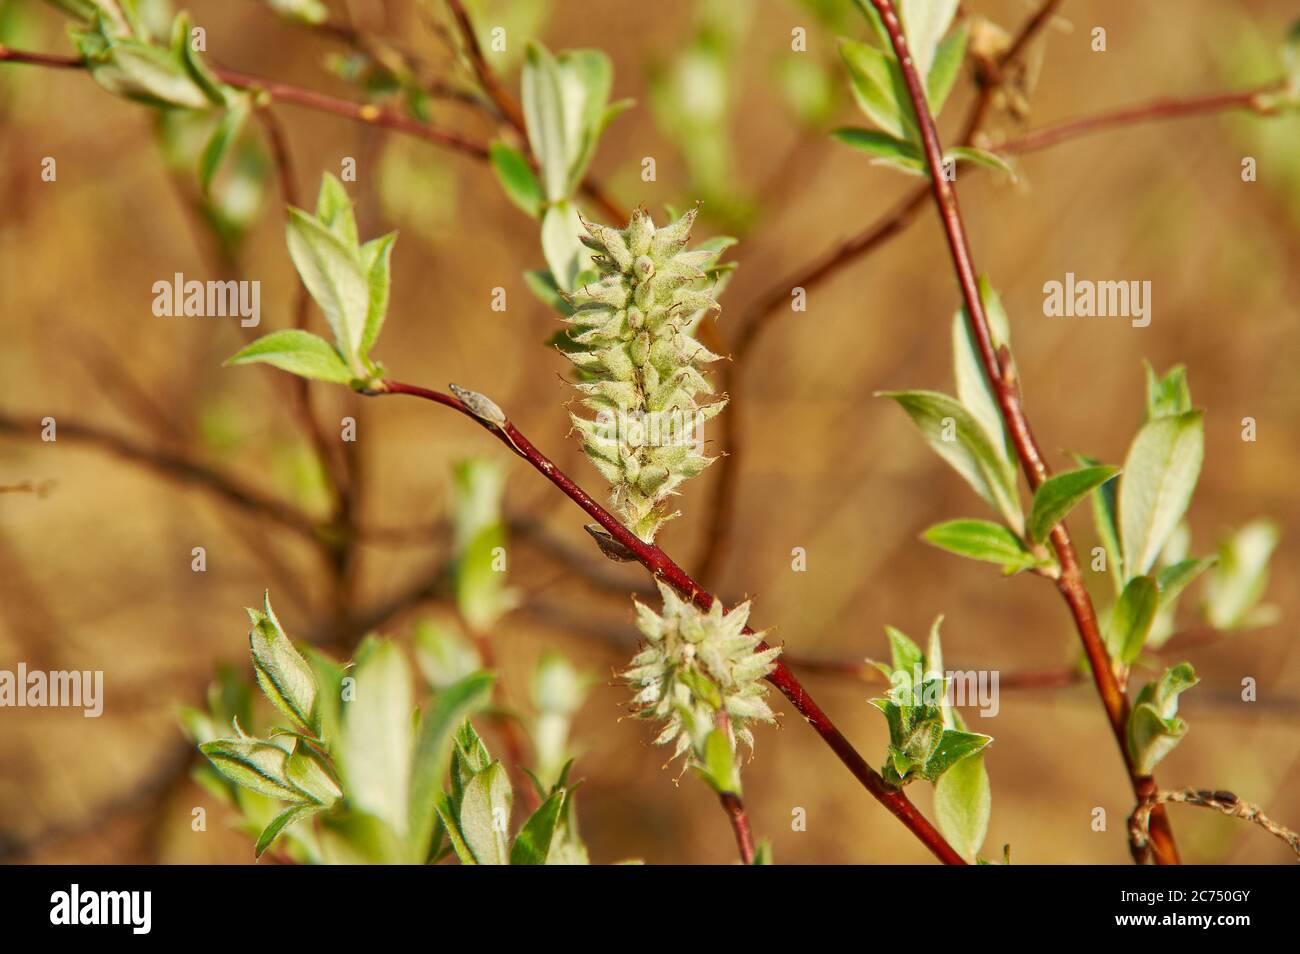 Salix lapponum, downy willow, having a wide distribution in Northern Europe Stock Photo